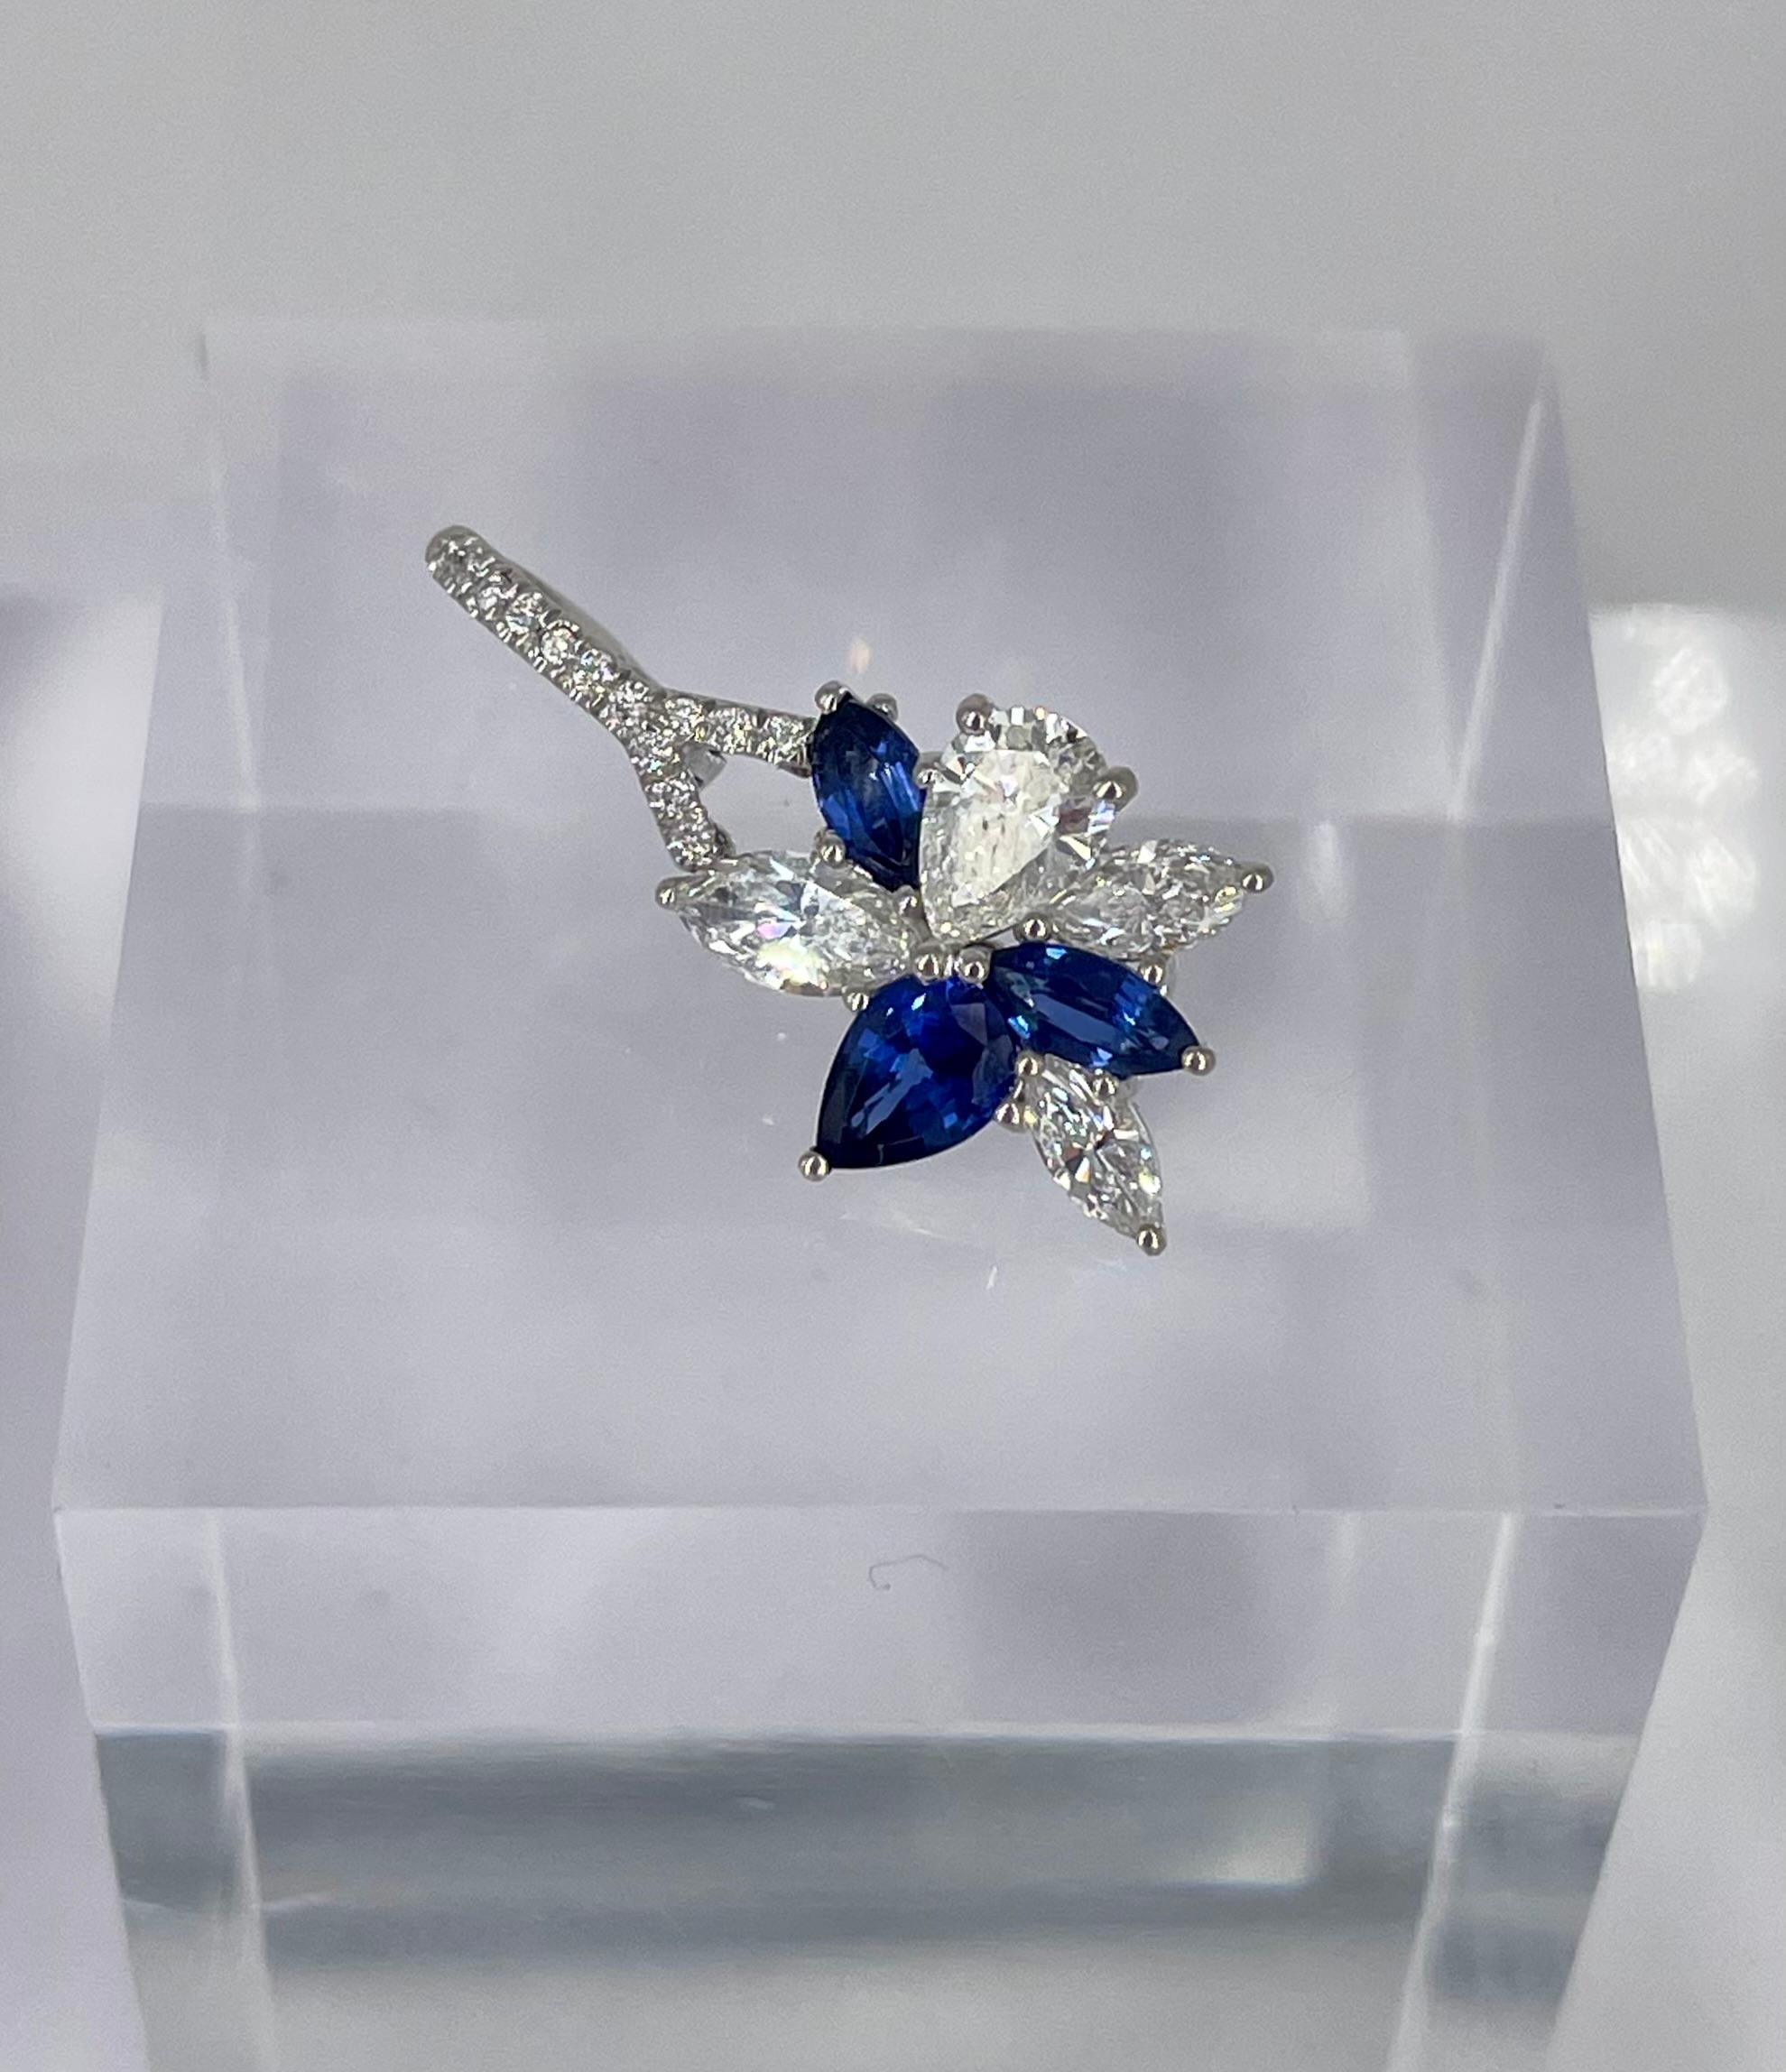 These elegant earrings by J. Birnbach are a beautiful way to incorporate blue sapphires into your jewelry collection. Crafted in 18K white gold, these  lever back earrings showcase a beautifully balanced floral design. The cluster of diamonds and